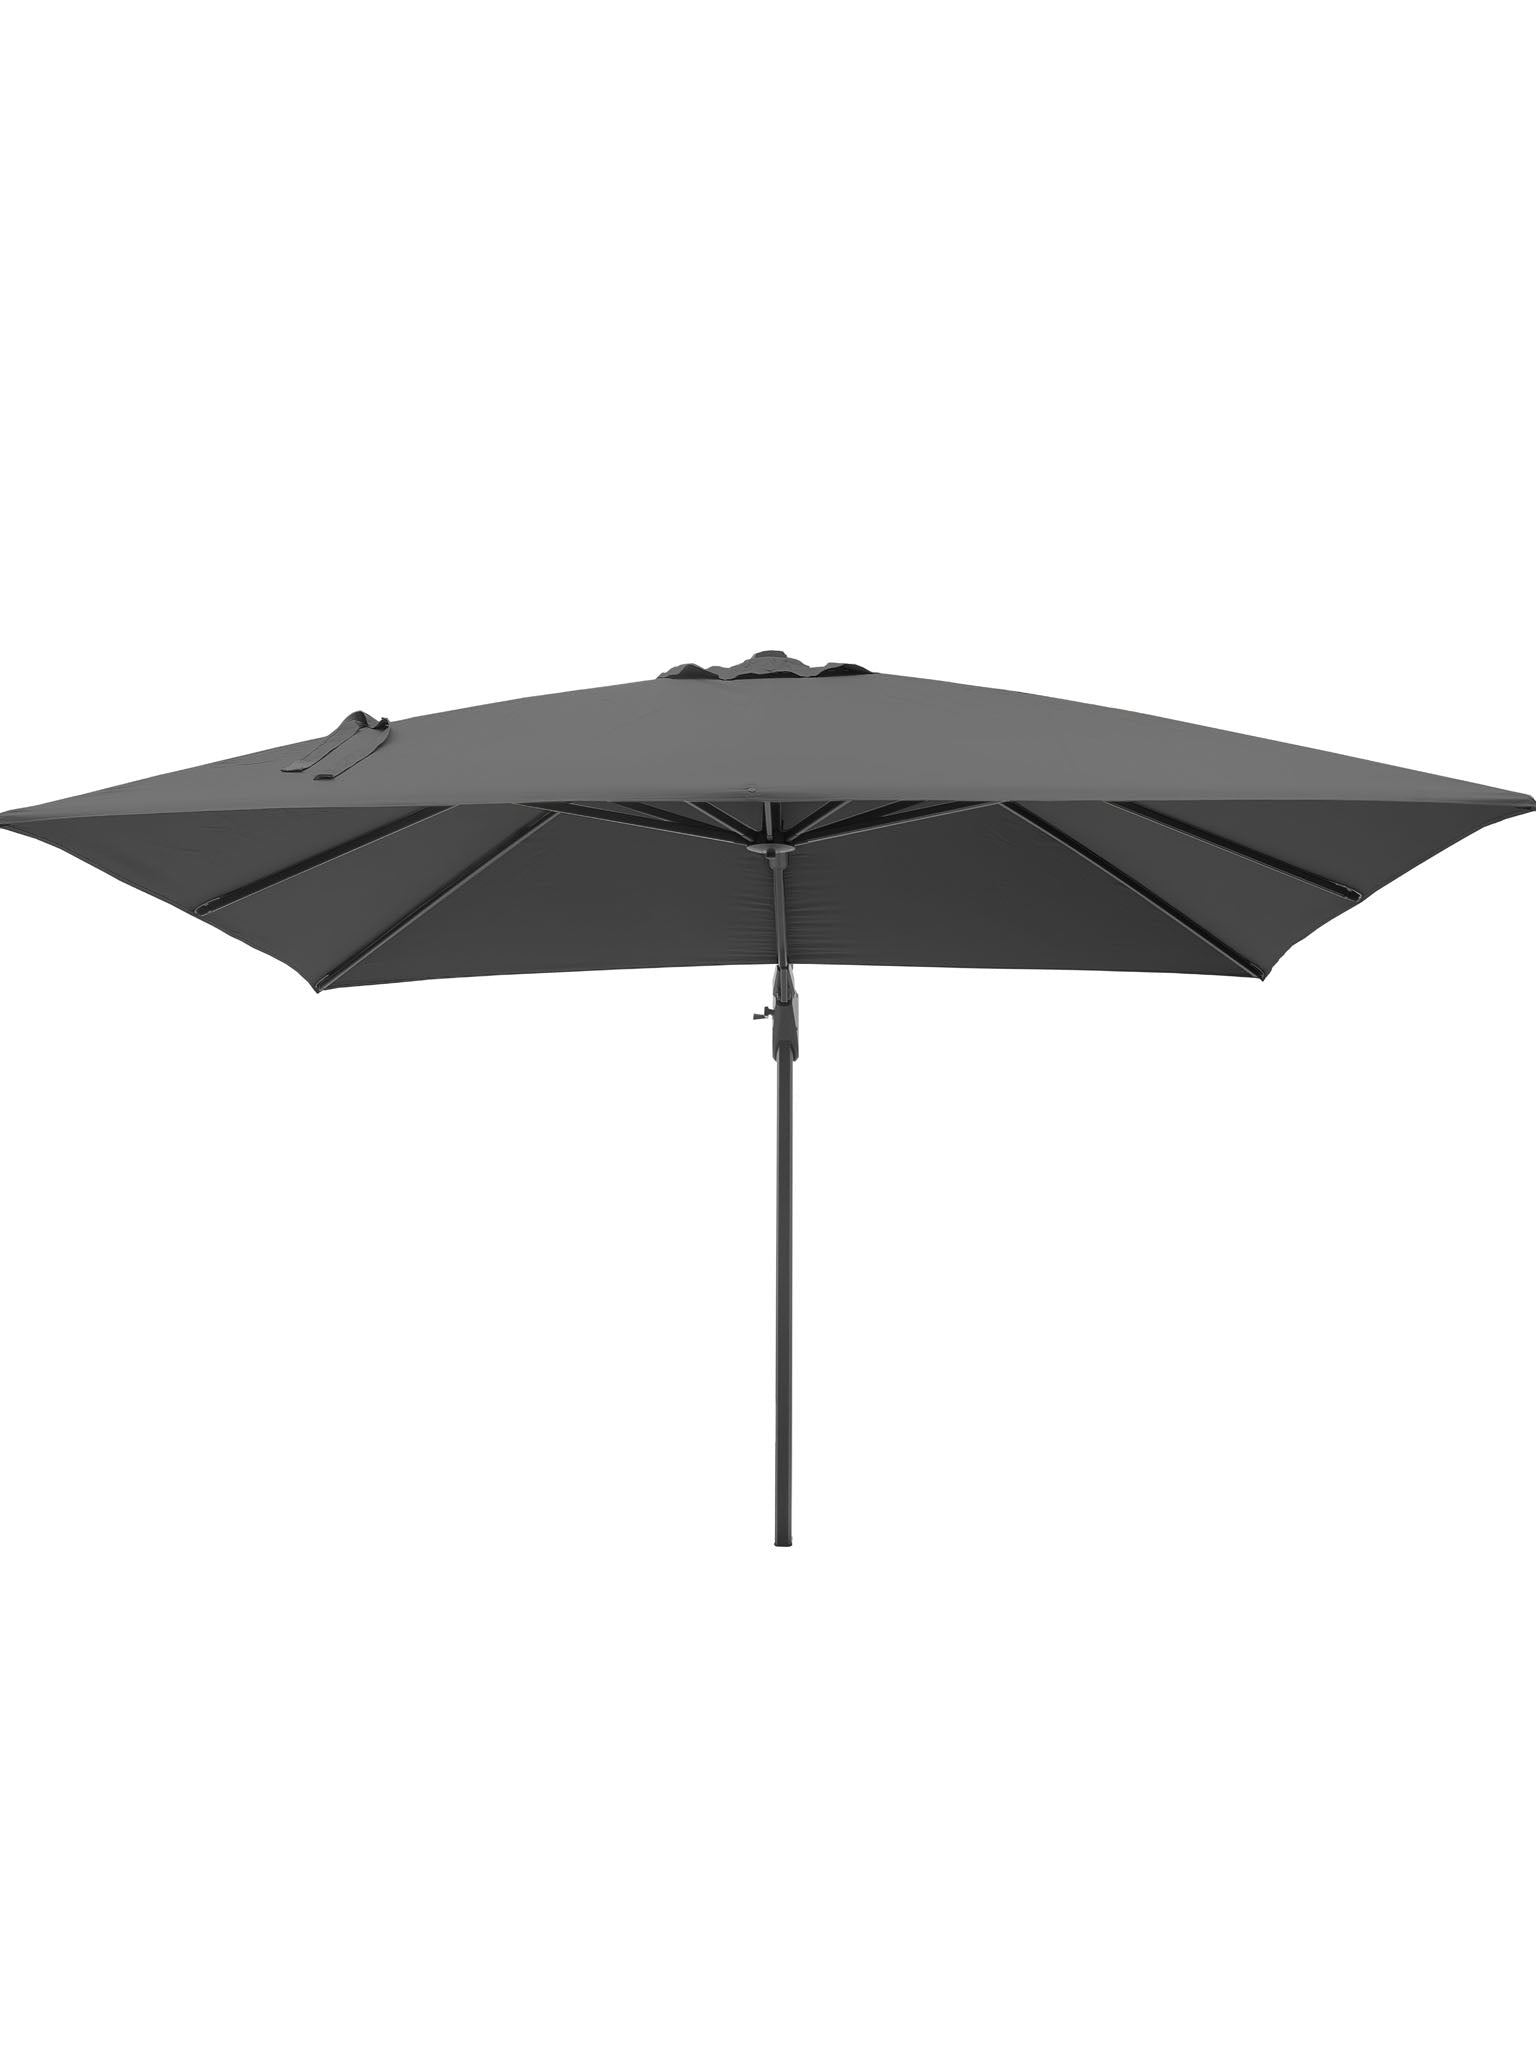 A stylish and deluxe design without compromise, engineered with comfort in mind. With the least effort, this parasol can rotate, tilt and twist.